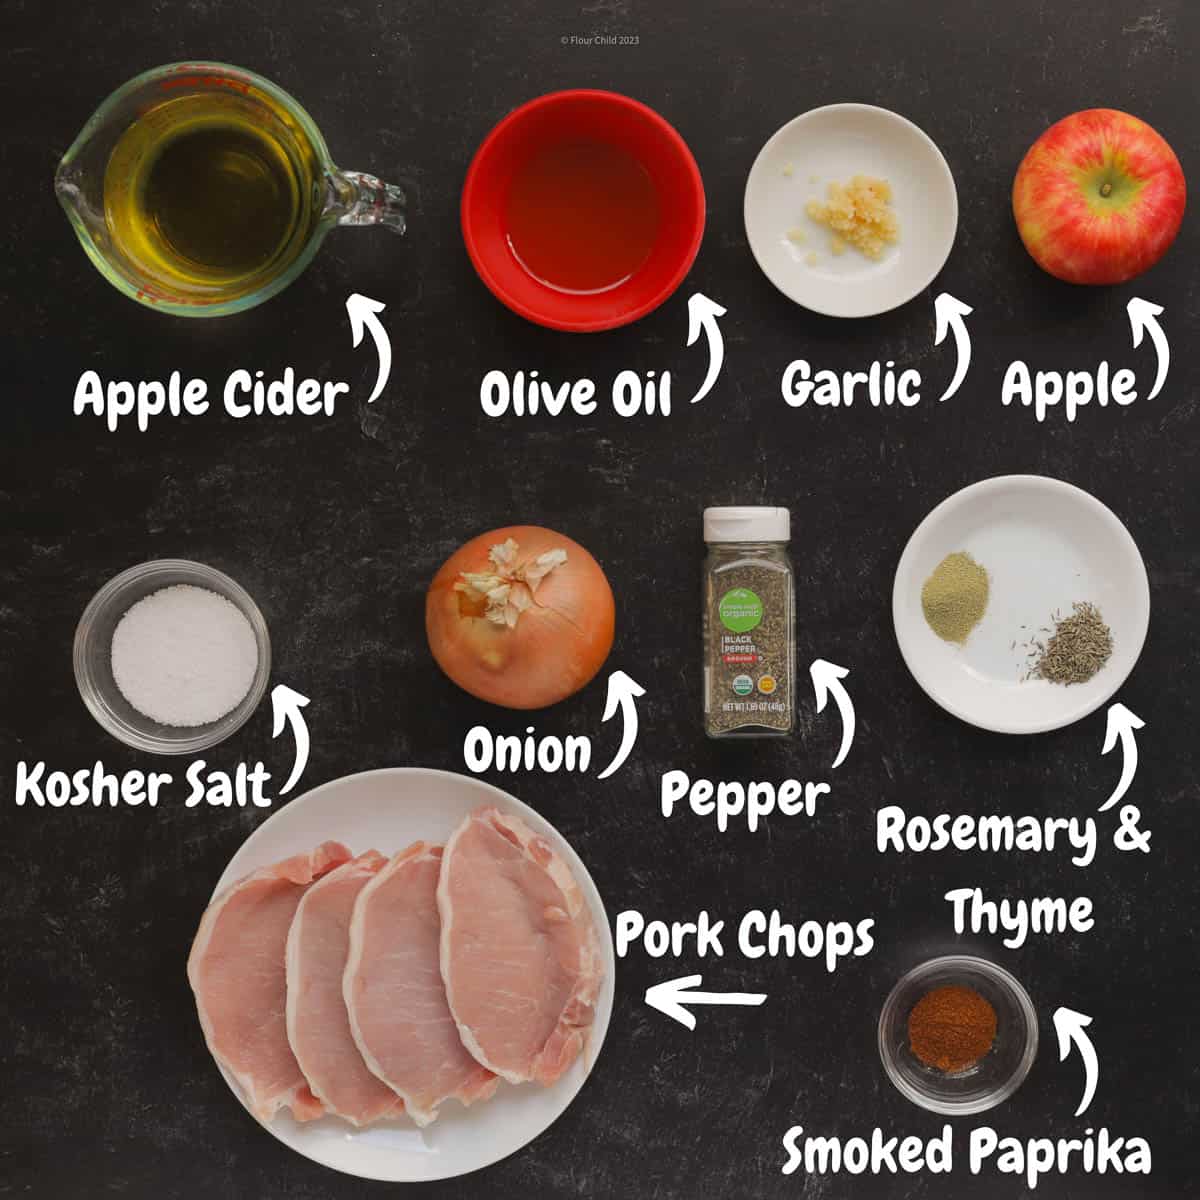 All the ingredients needed to make boneless apple cider pork chops, on a black background.